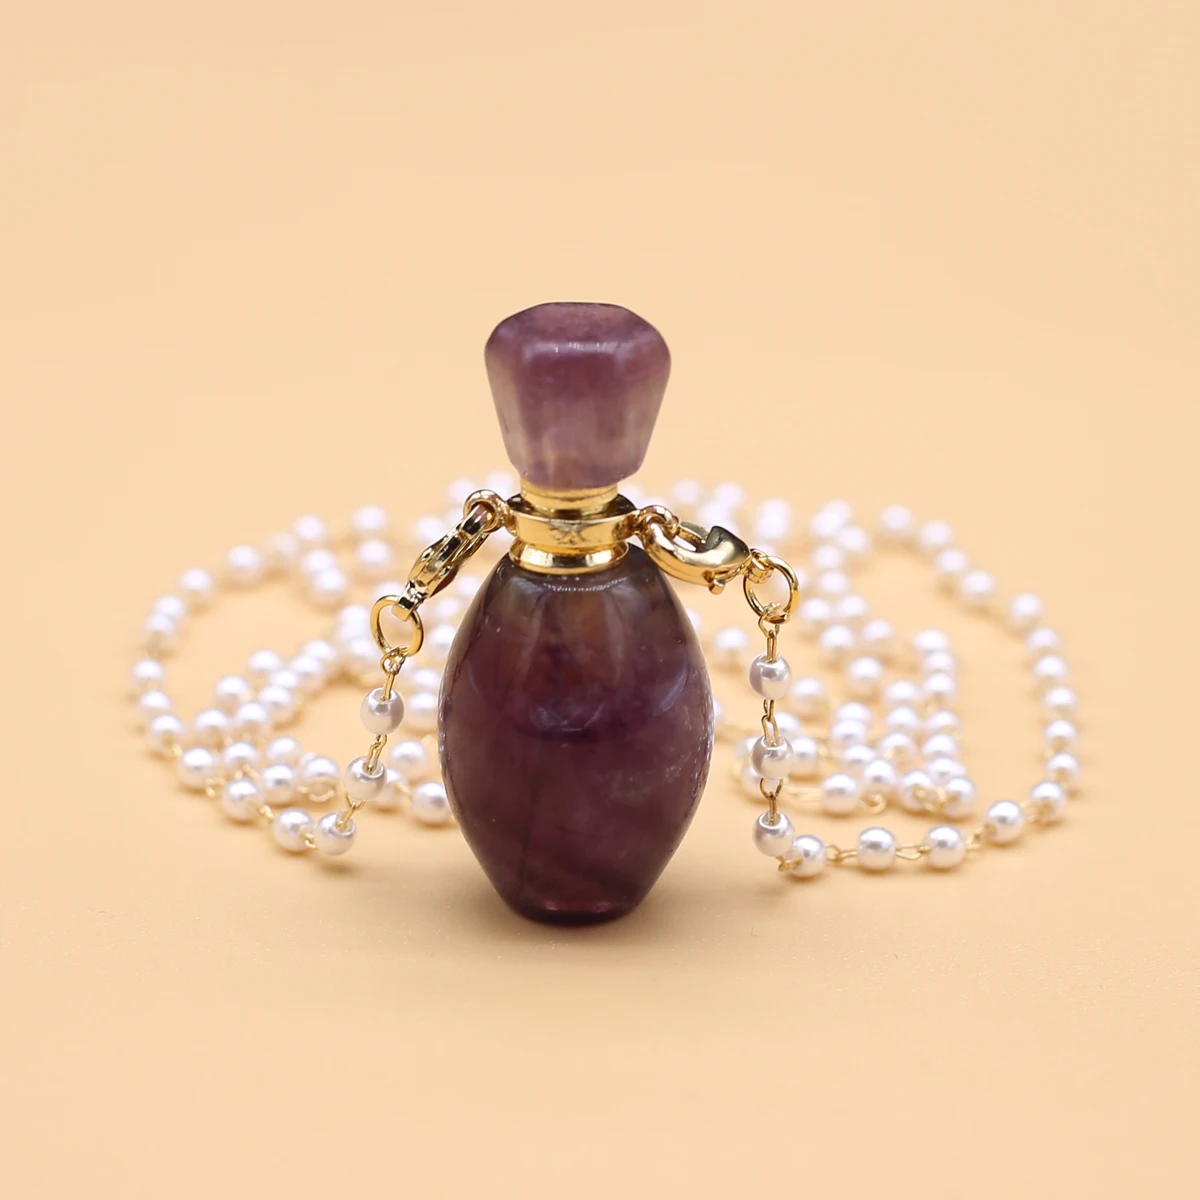 

Natural Stone Fluorite Perfume Bottle Pendant Necklace Charms Pearl Chain Necklaces for Women Jewelry Handmade Crafts 18x35x12mm